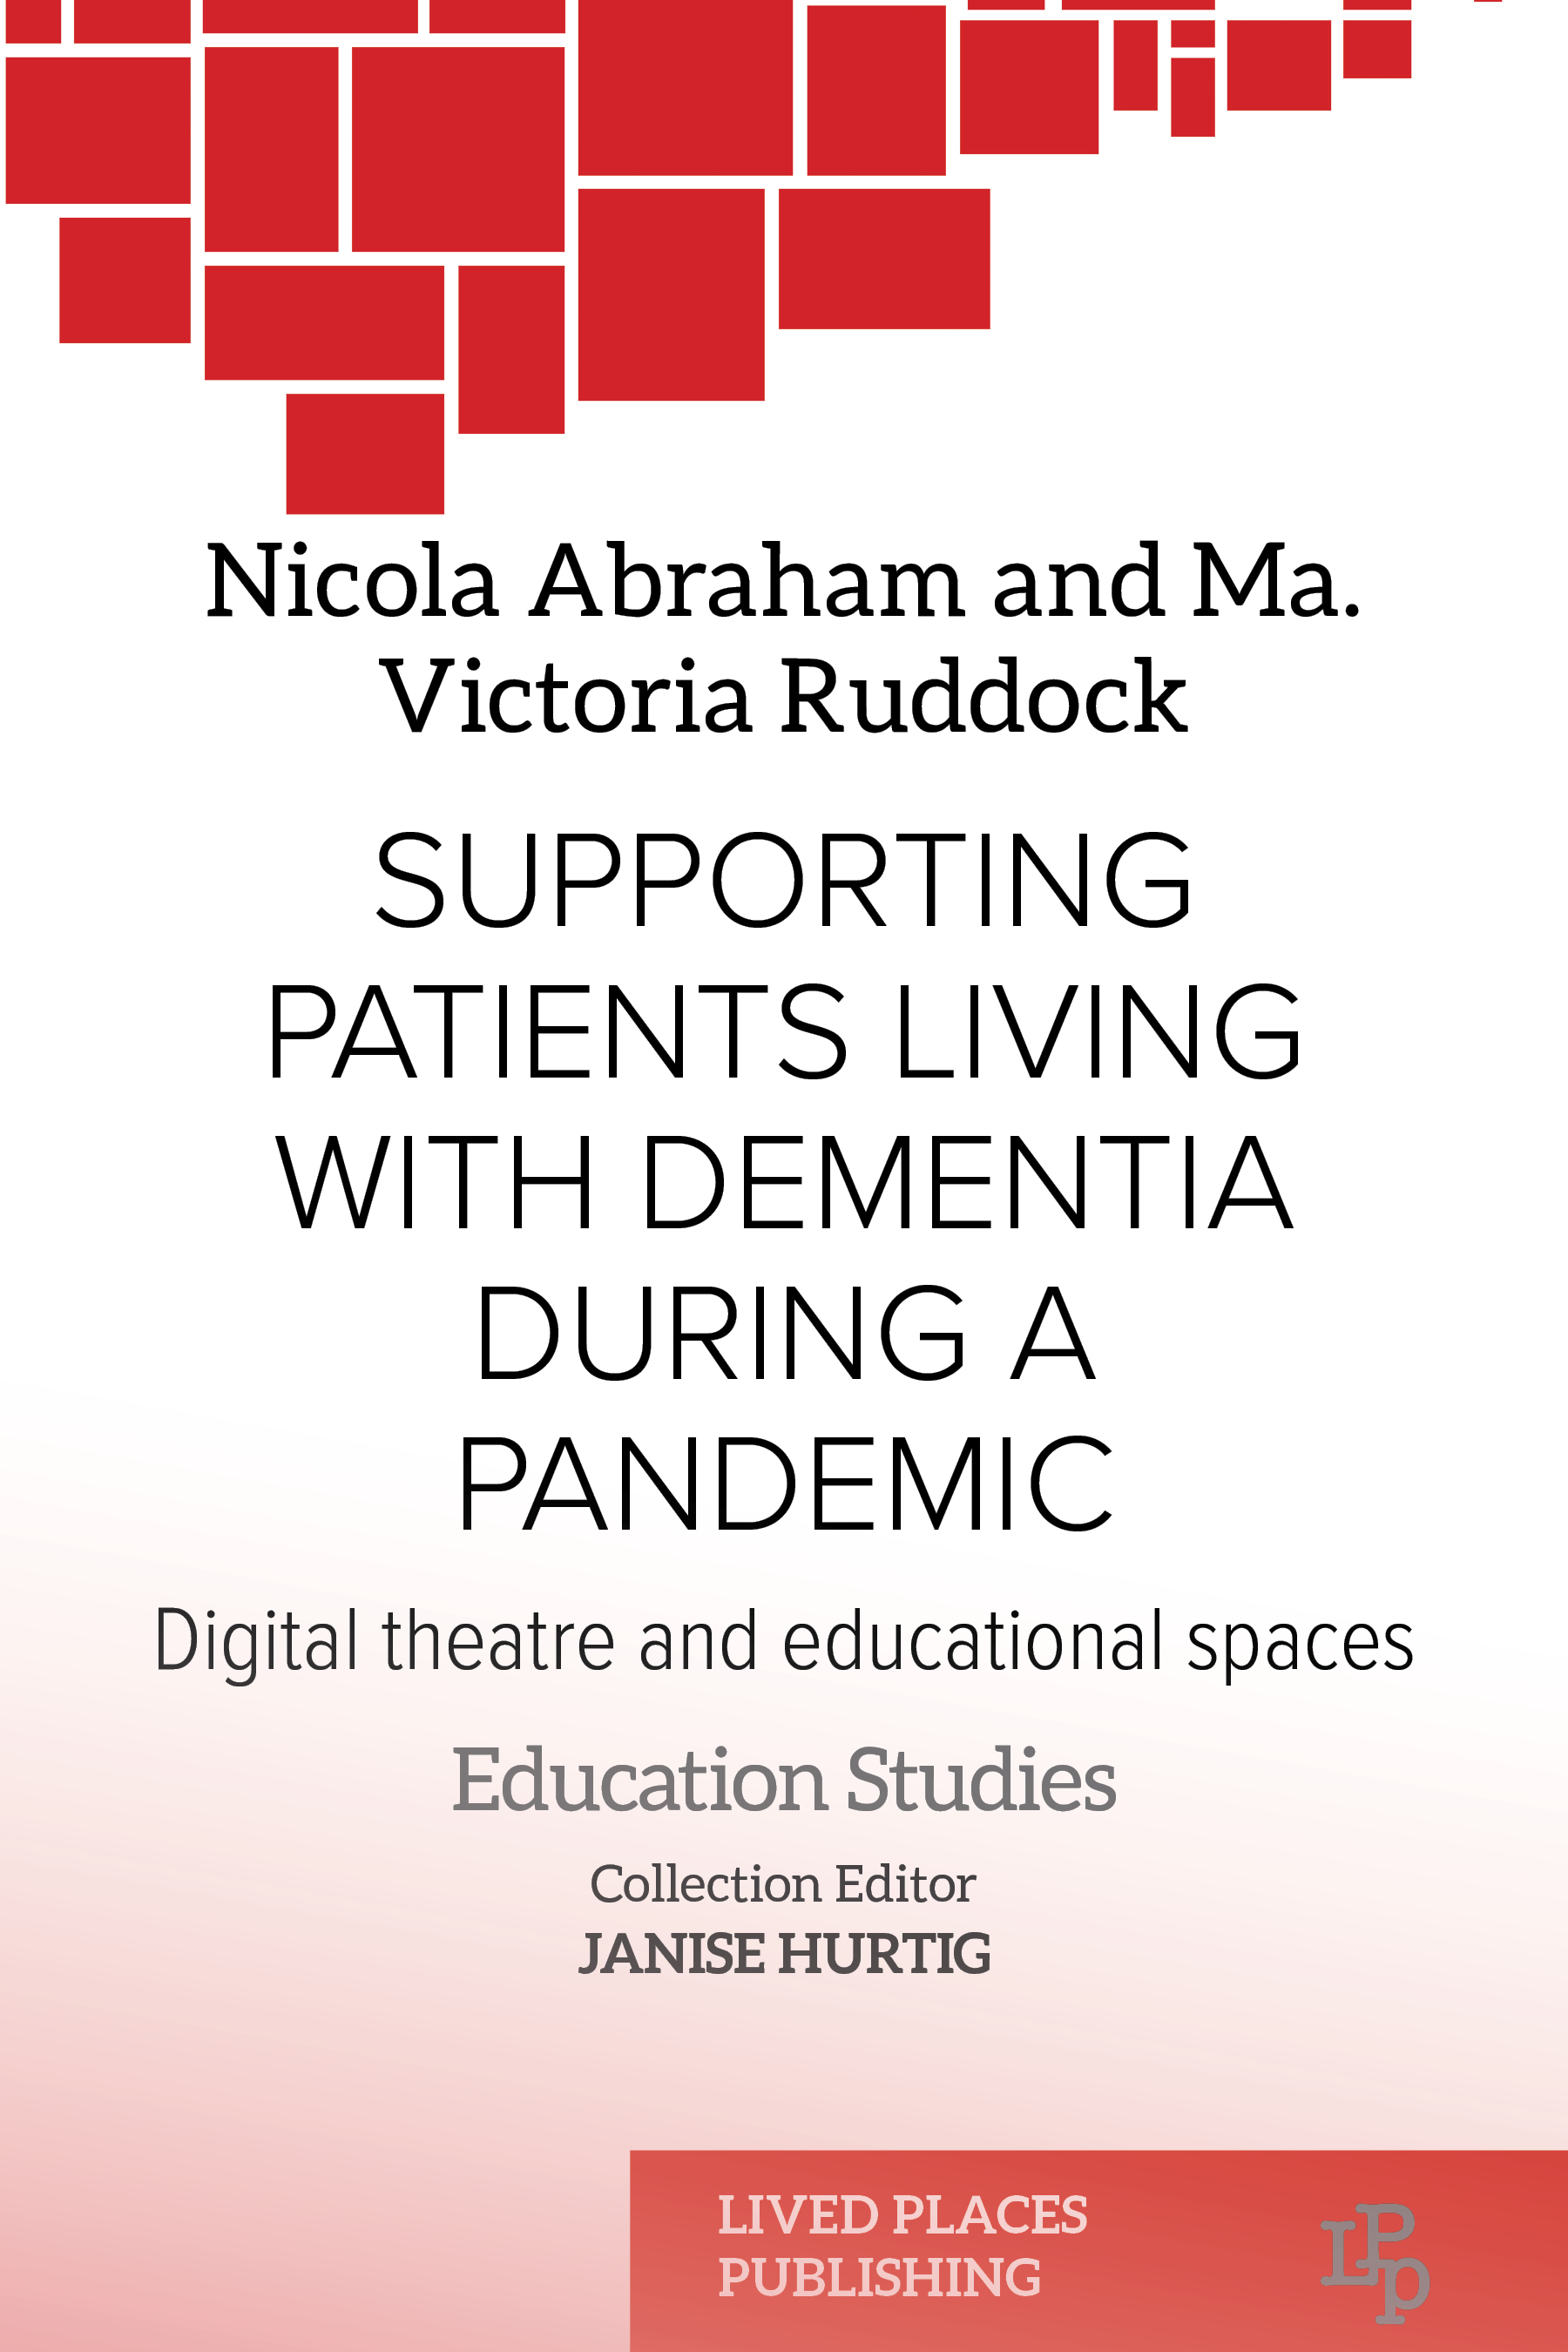 Supporting patients living with dementia during a pandemic by Nicola Abraham and Victoria Ruddock